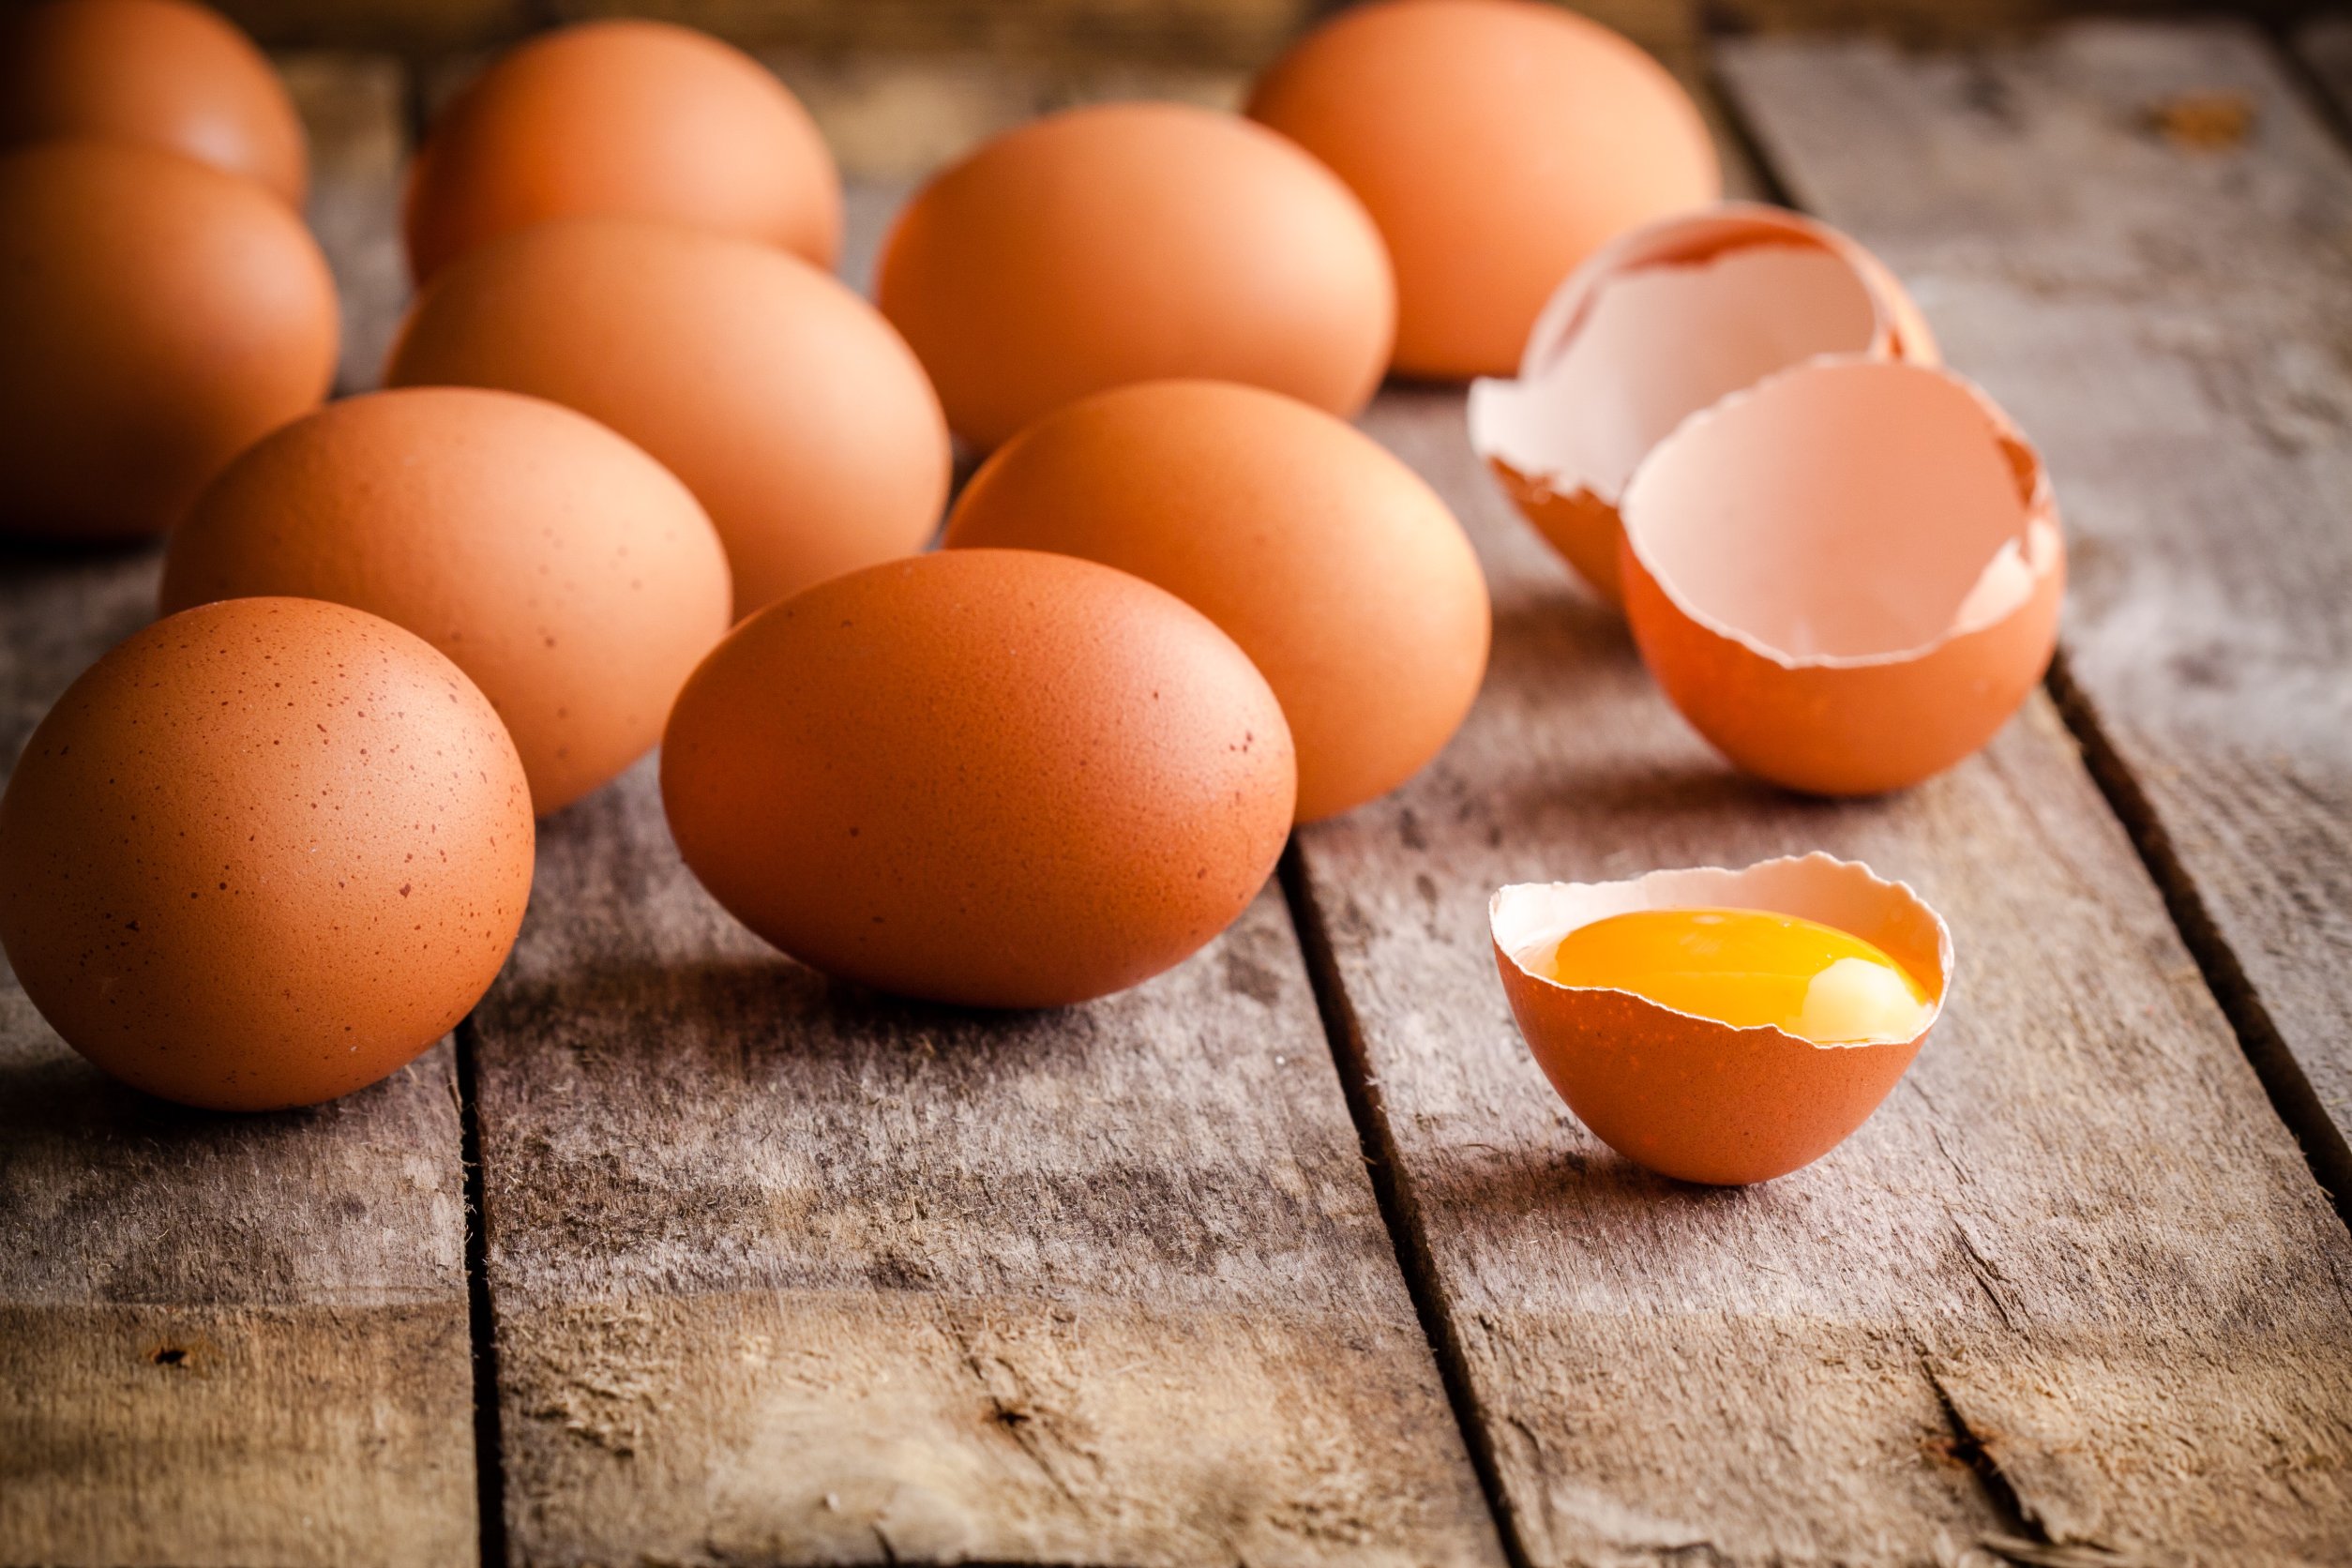 Are Eggs Good or Bad for Your Health